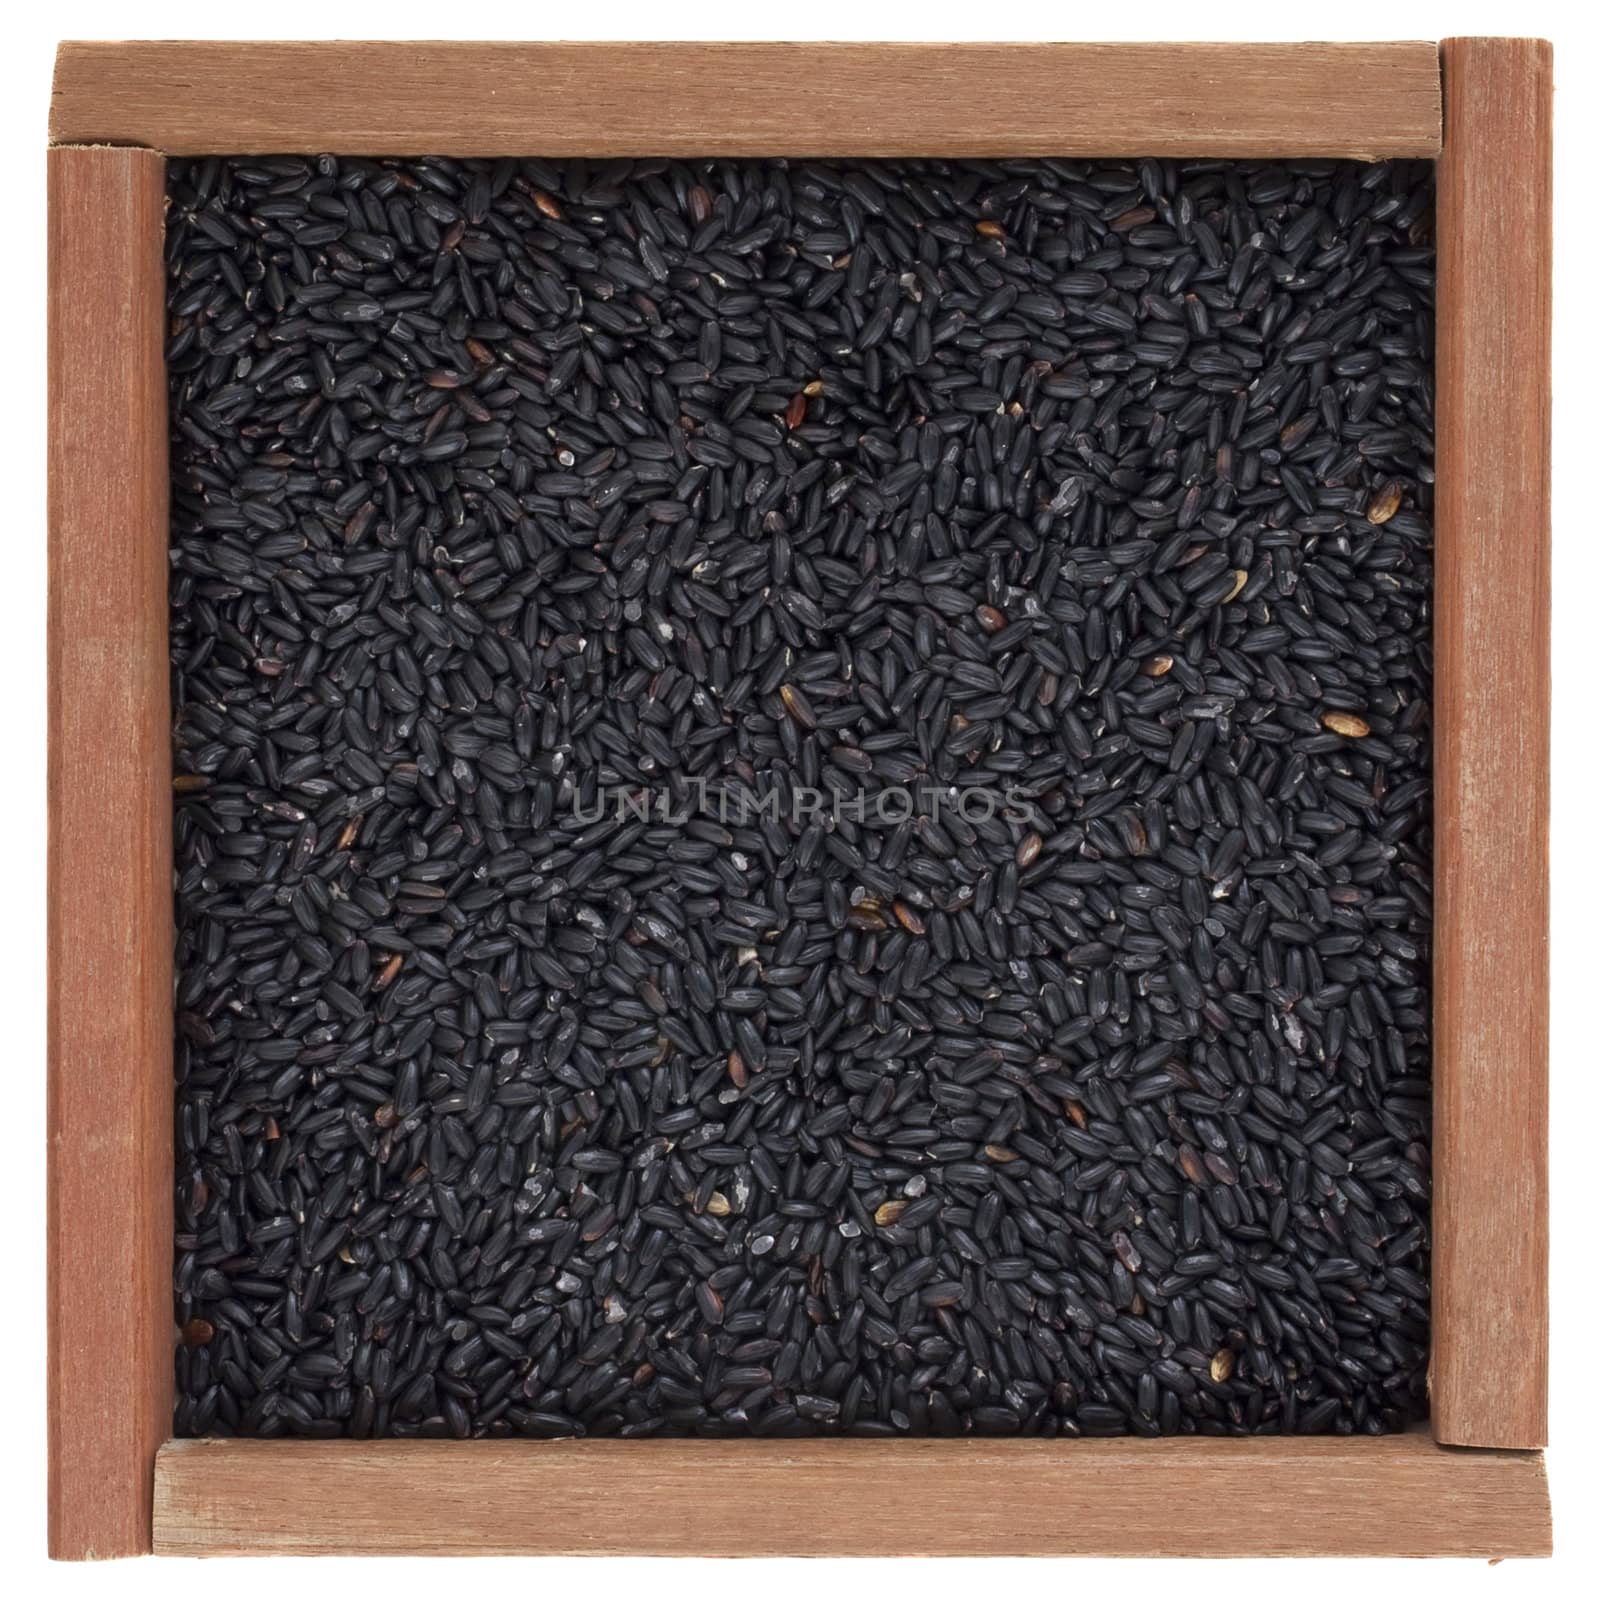 Chinese black forbidden rice in a wooden box by PixelsAway